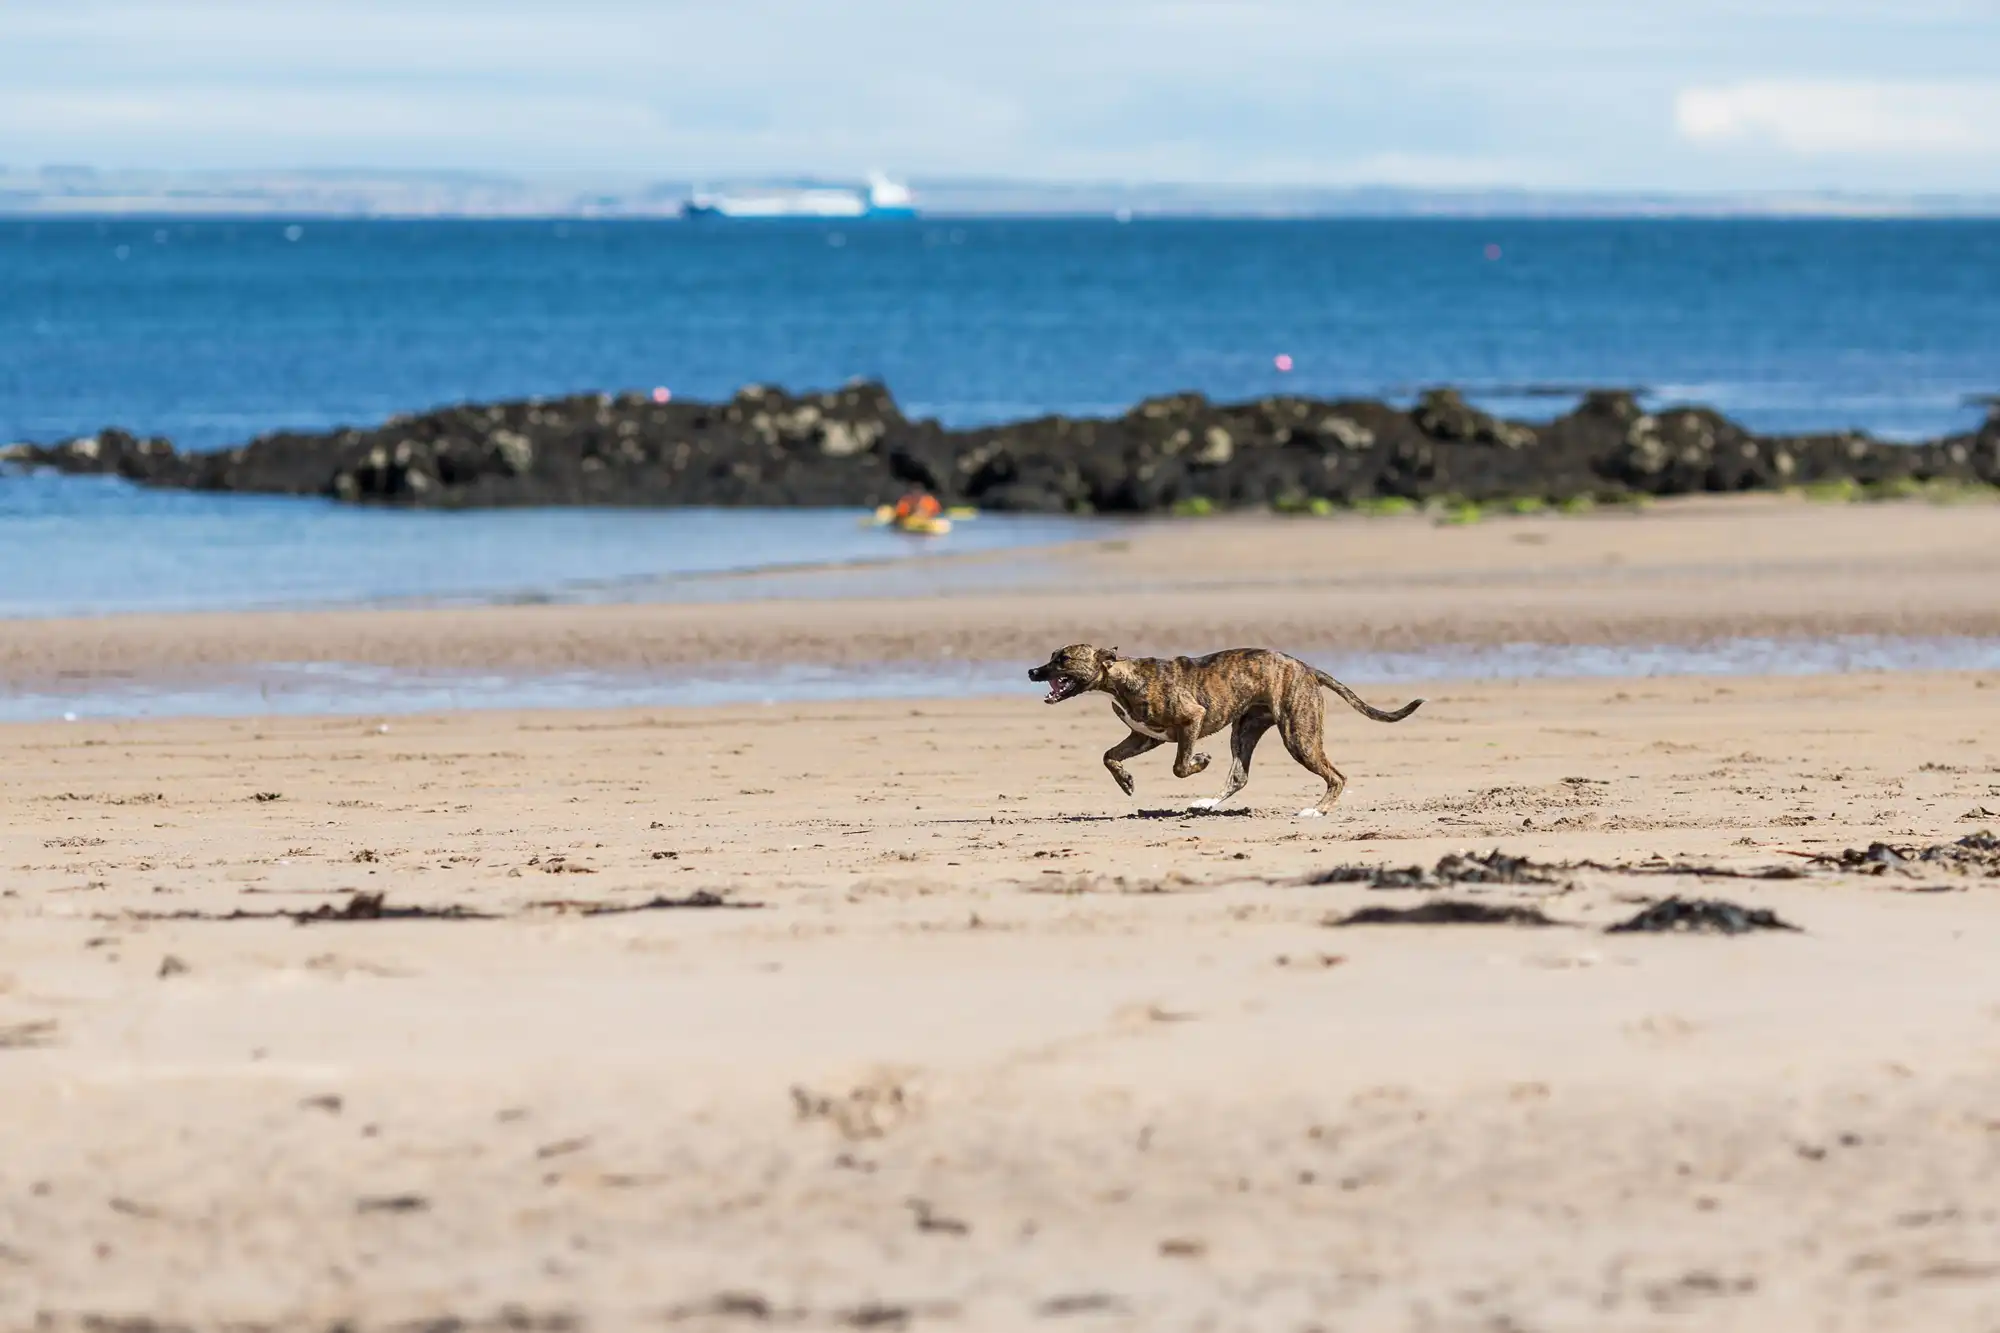 A dog running on a sandy beach with the ocean and distant ships in the background.